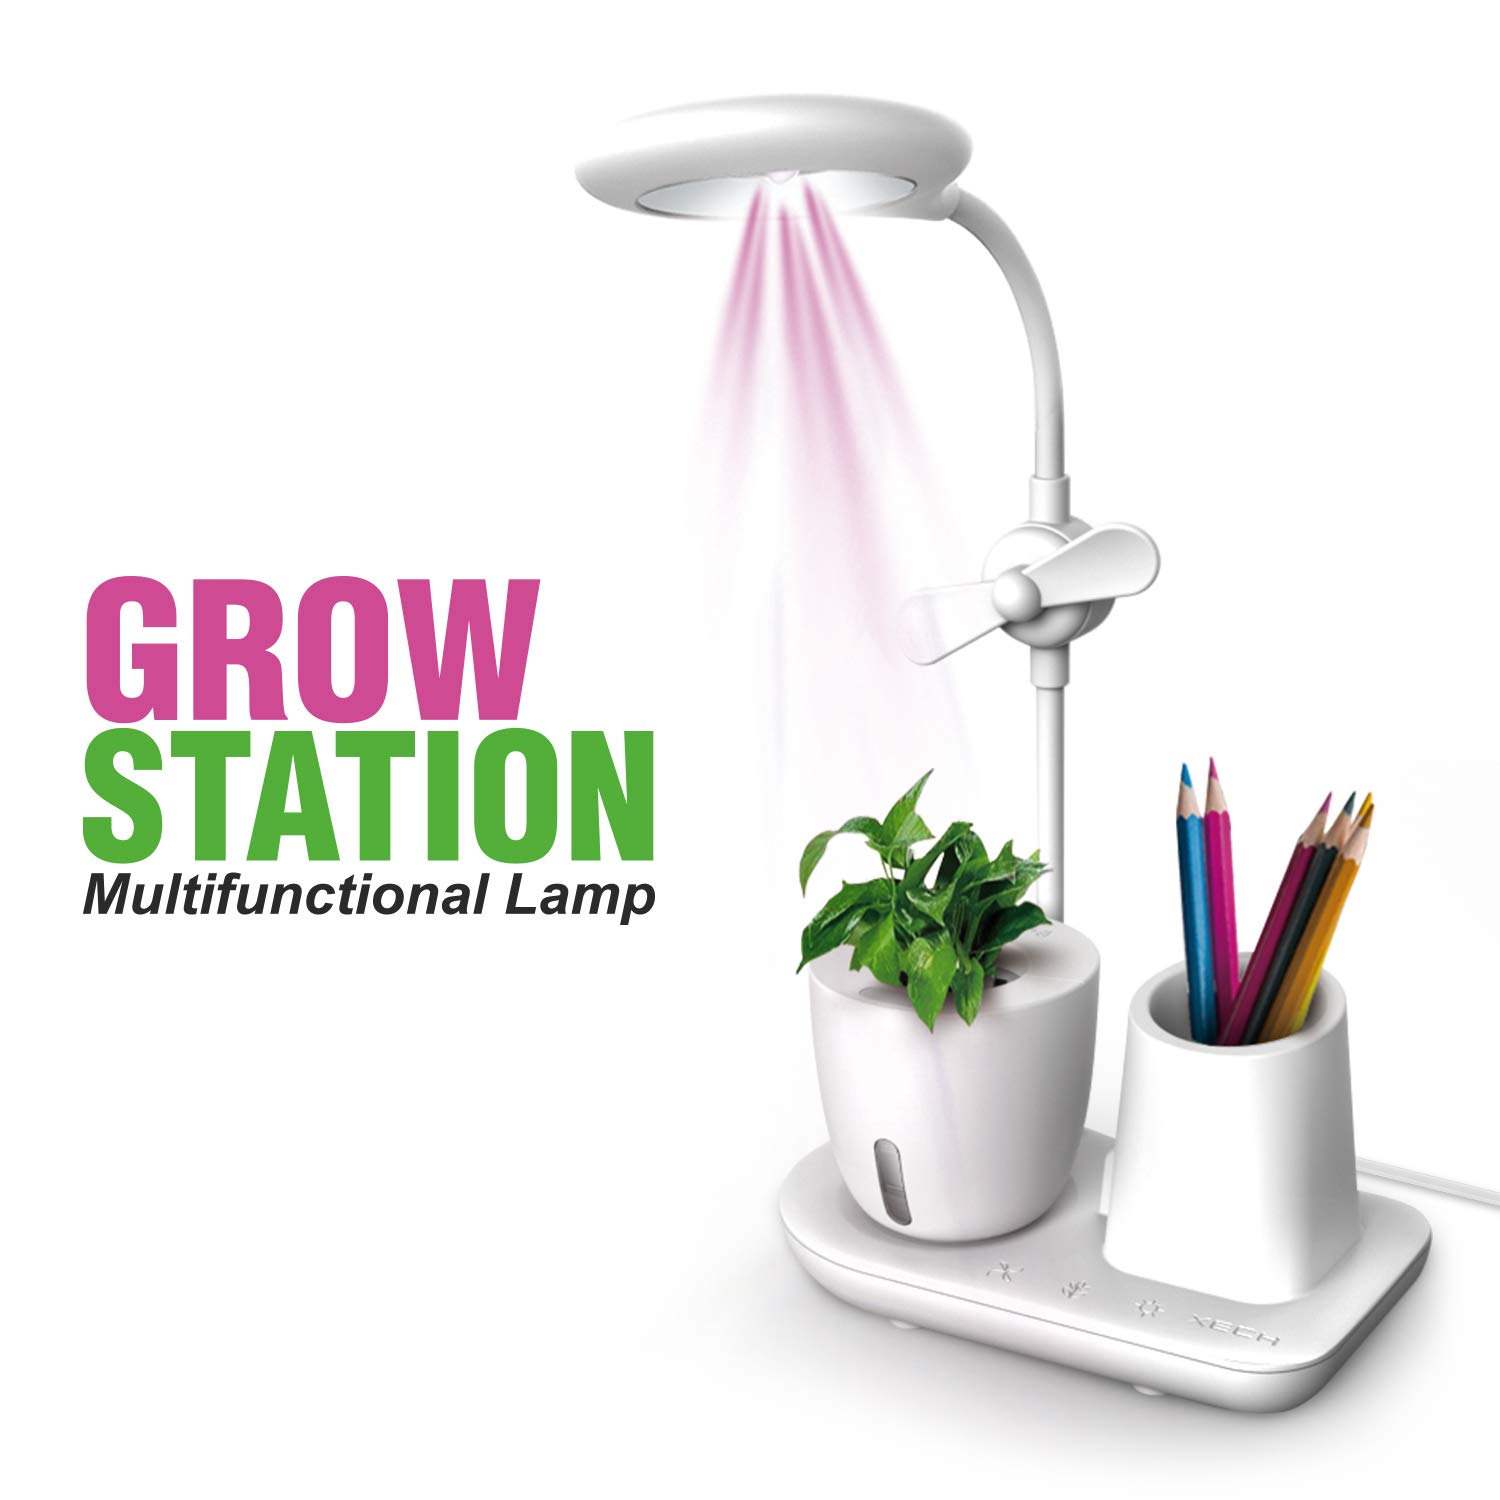 Desk Lamp with UV Light and Plant Holder Grow Station 6 in 1 Multi Functional Table Lamp with Fan Smartphone Holder USB Charging Port Smart LED Light Adjustable Brightness Oxygen Booster (White)